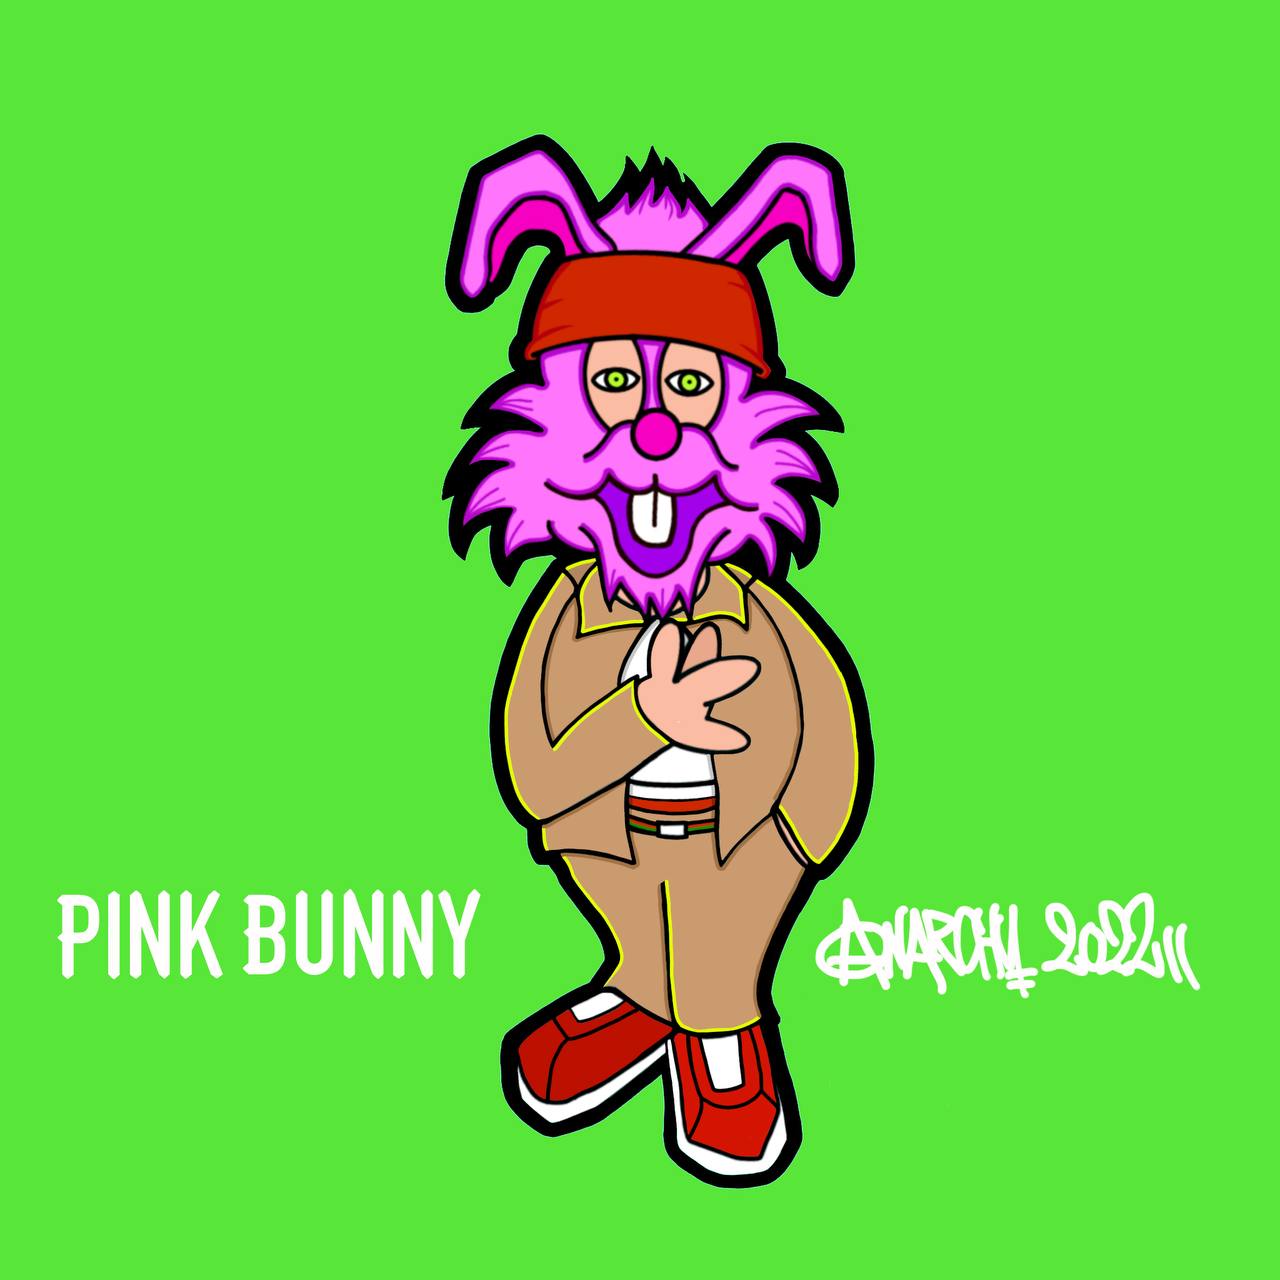 PINK BUNNY (VALUE 1500NXD)